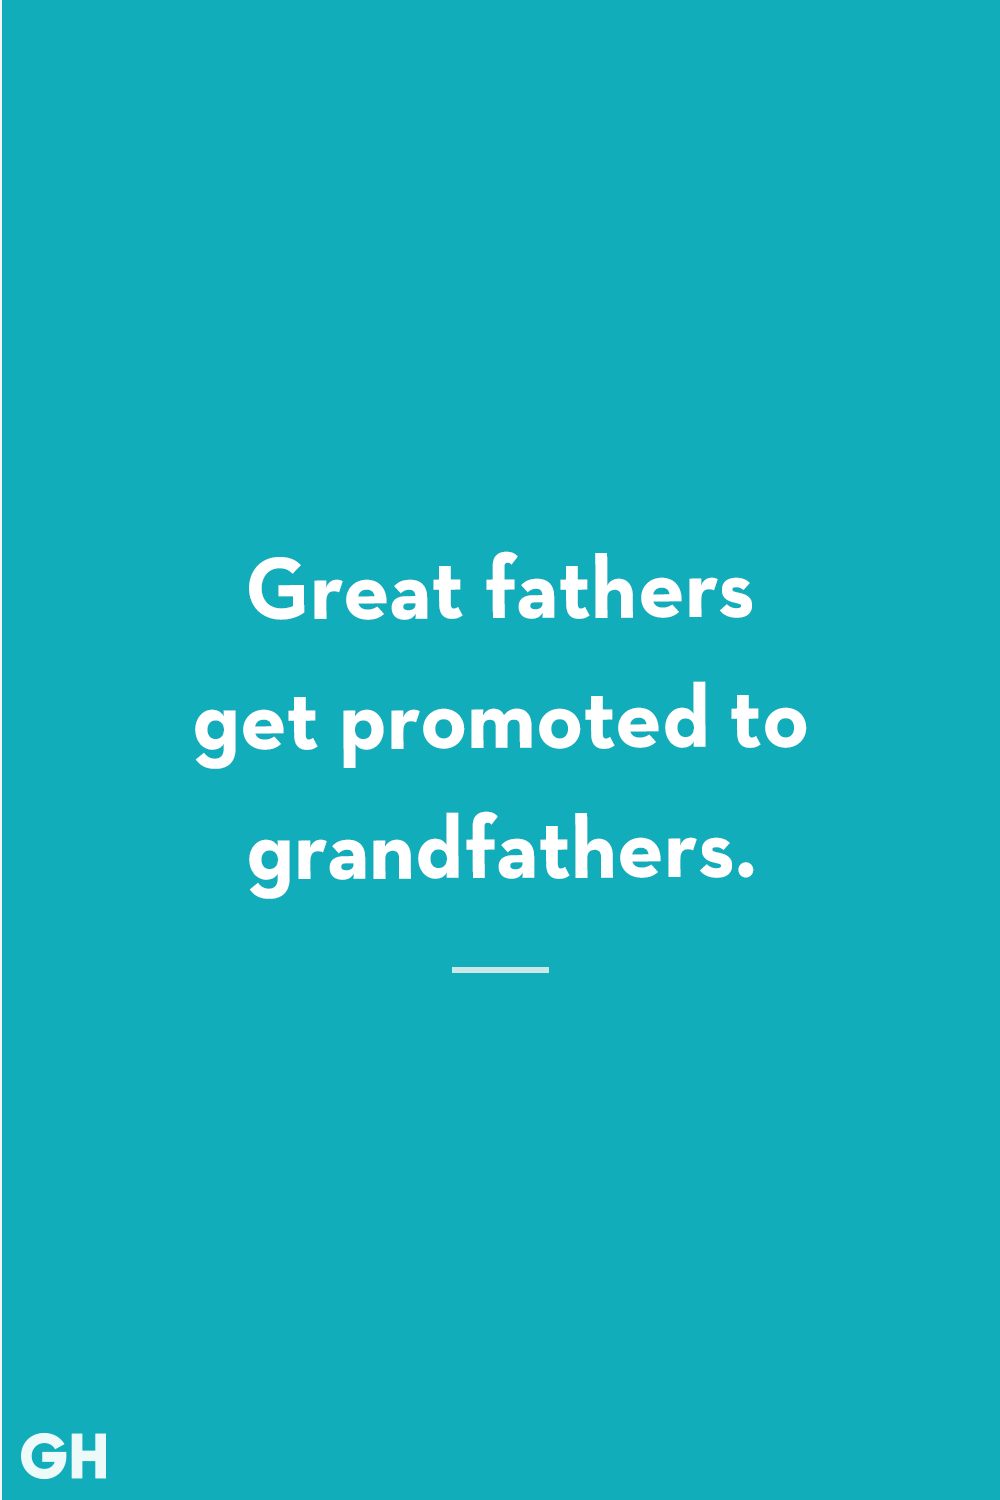 Download 20 Best Grandpa Quotes Sayings And Quotes About Grandfathers